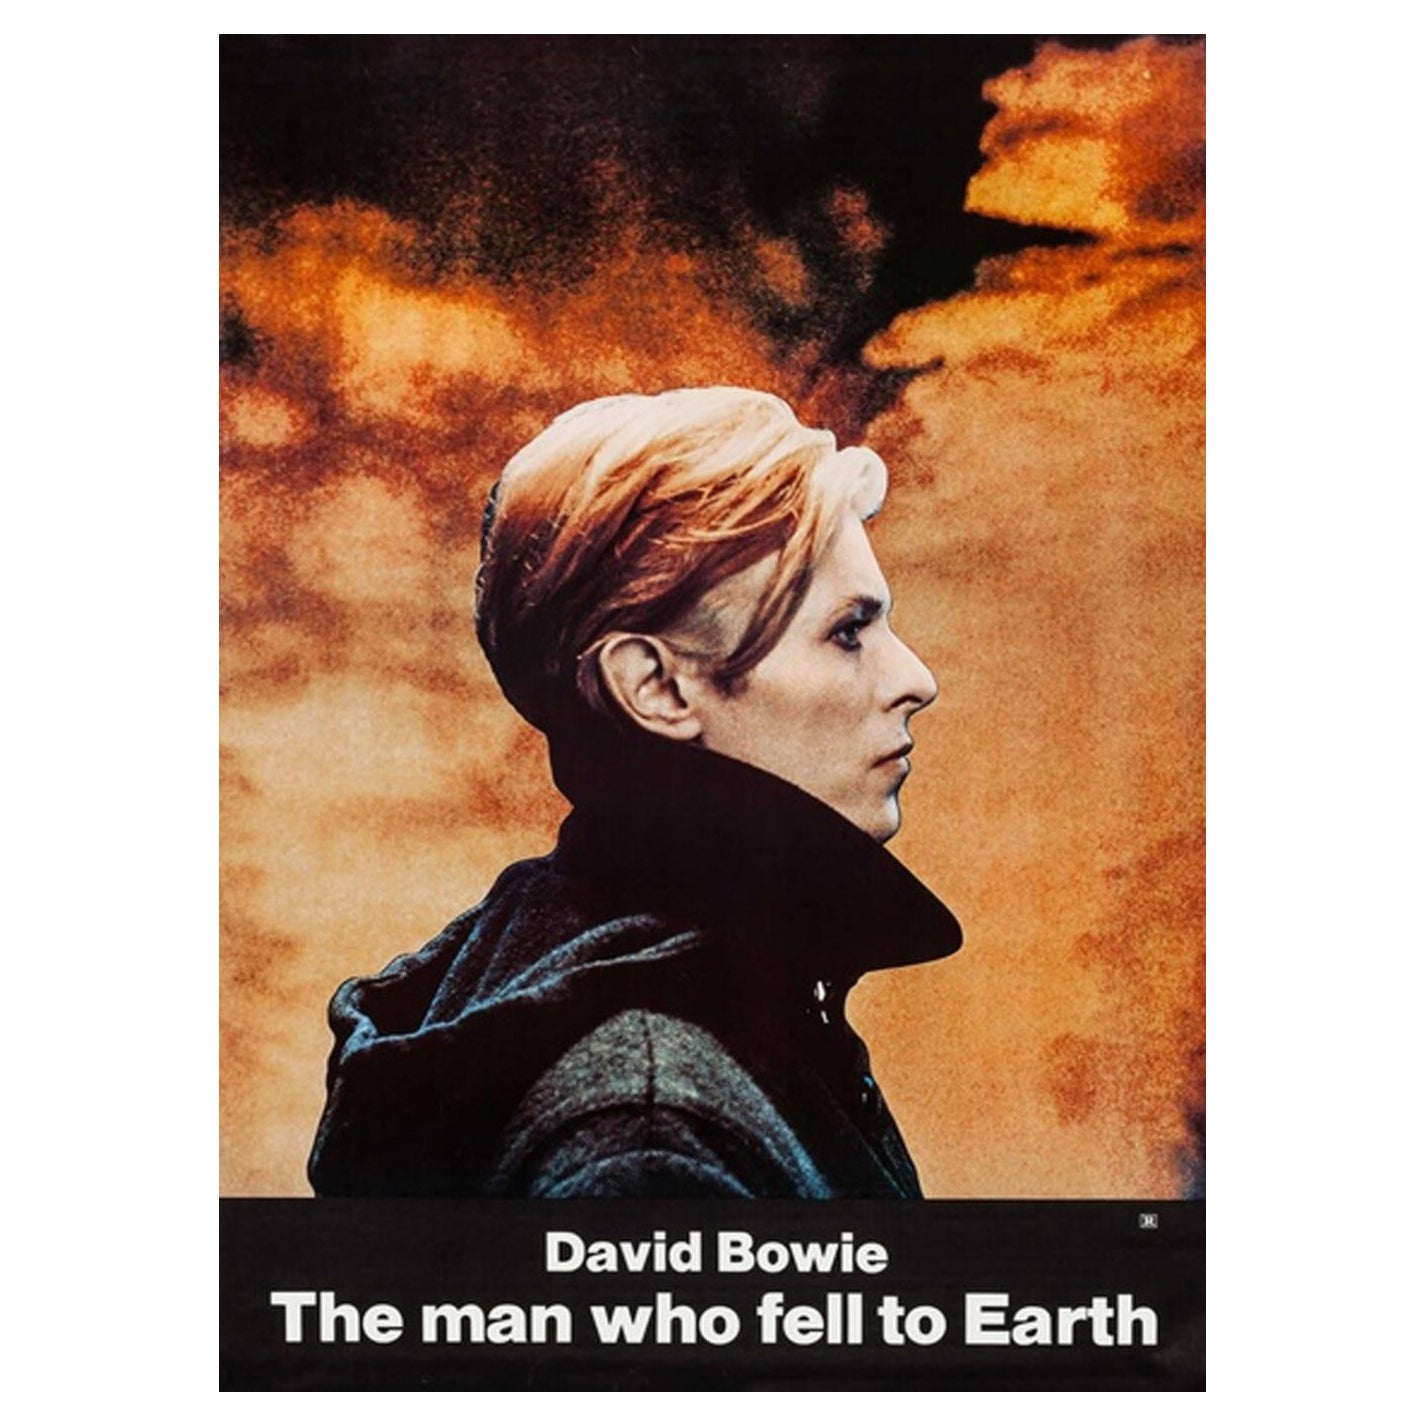 1976 David Bowie - The Man Who Fell To Earth Original Vintage Poster For Sale